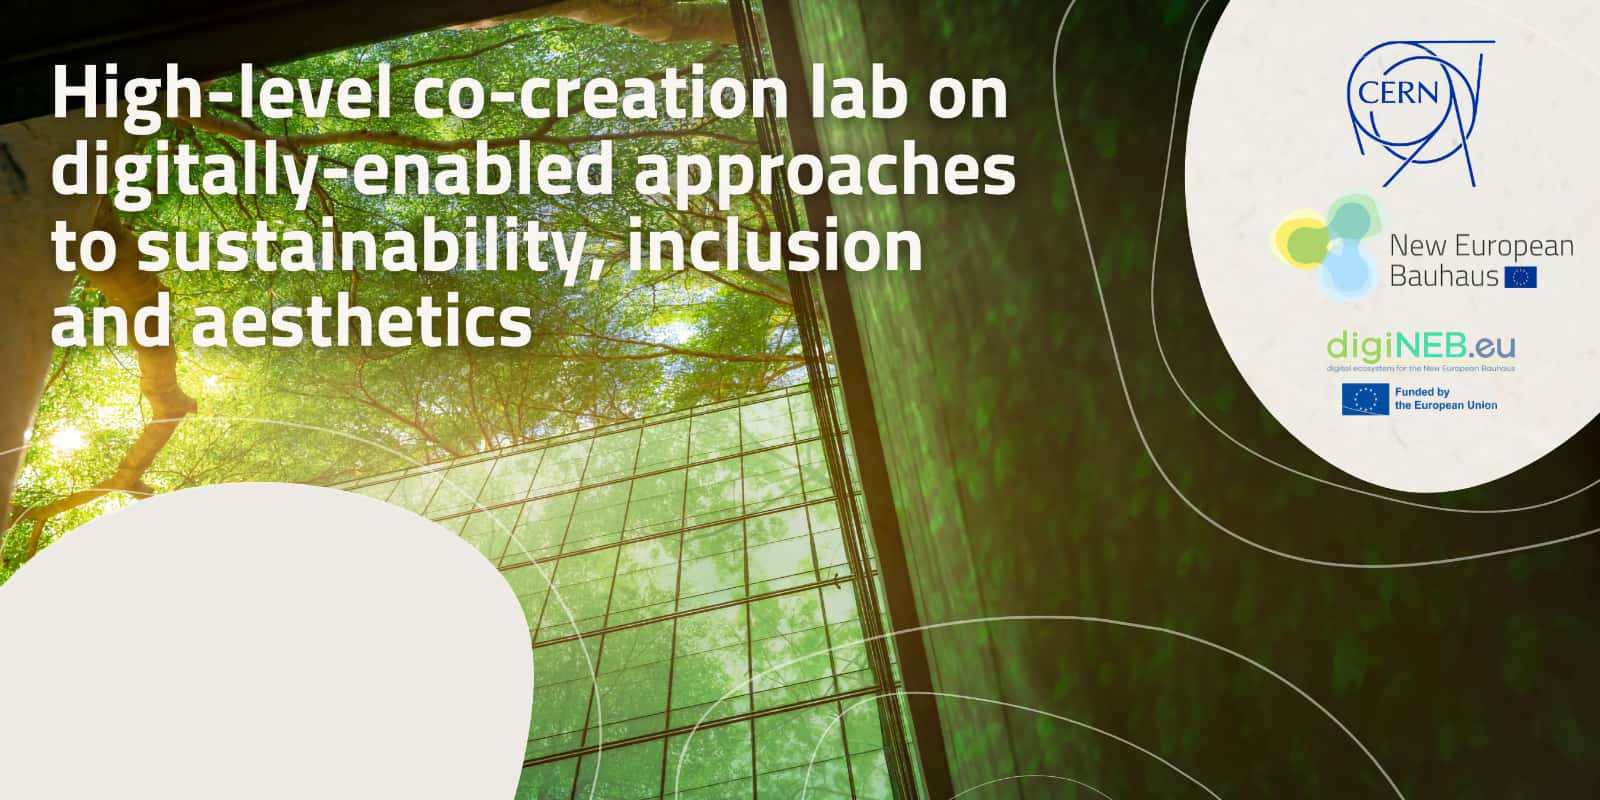 High-level co-creation lab on digitally-enabled approaches to sustainability, inclusion and aesthetics